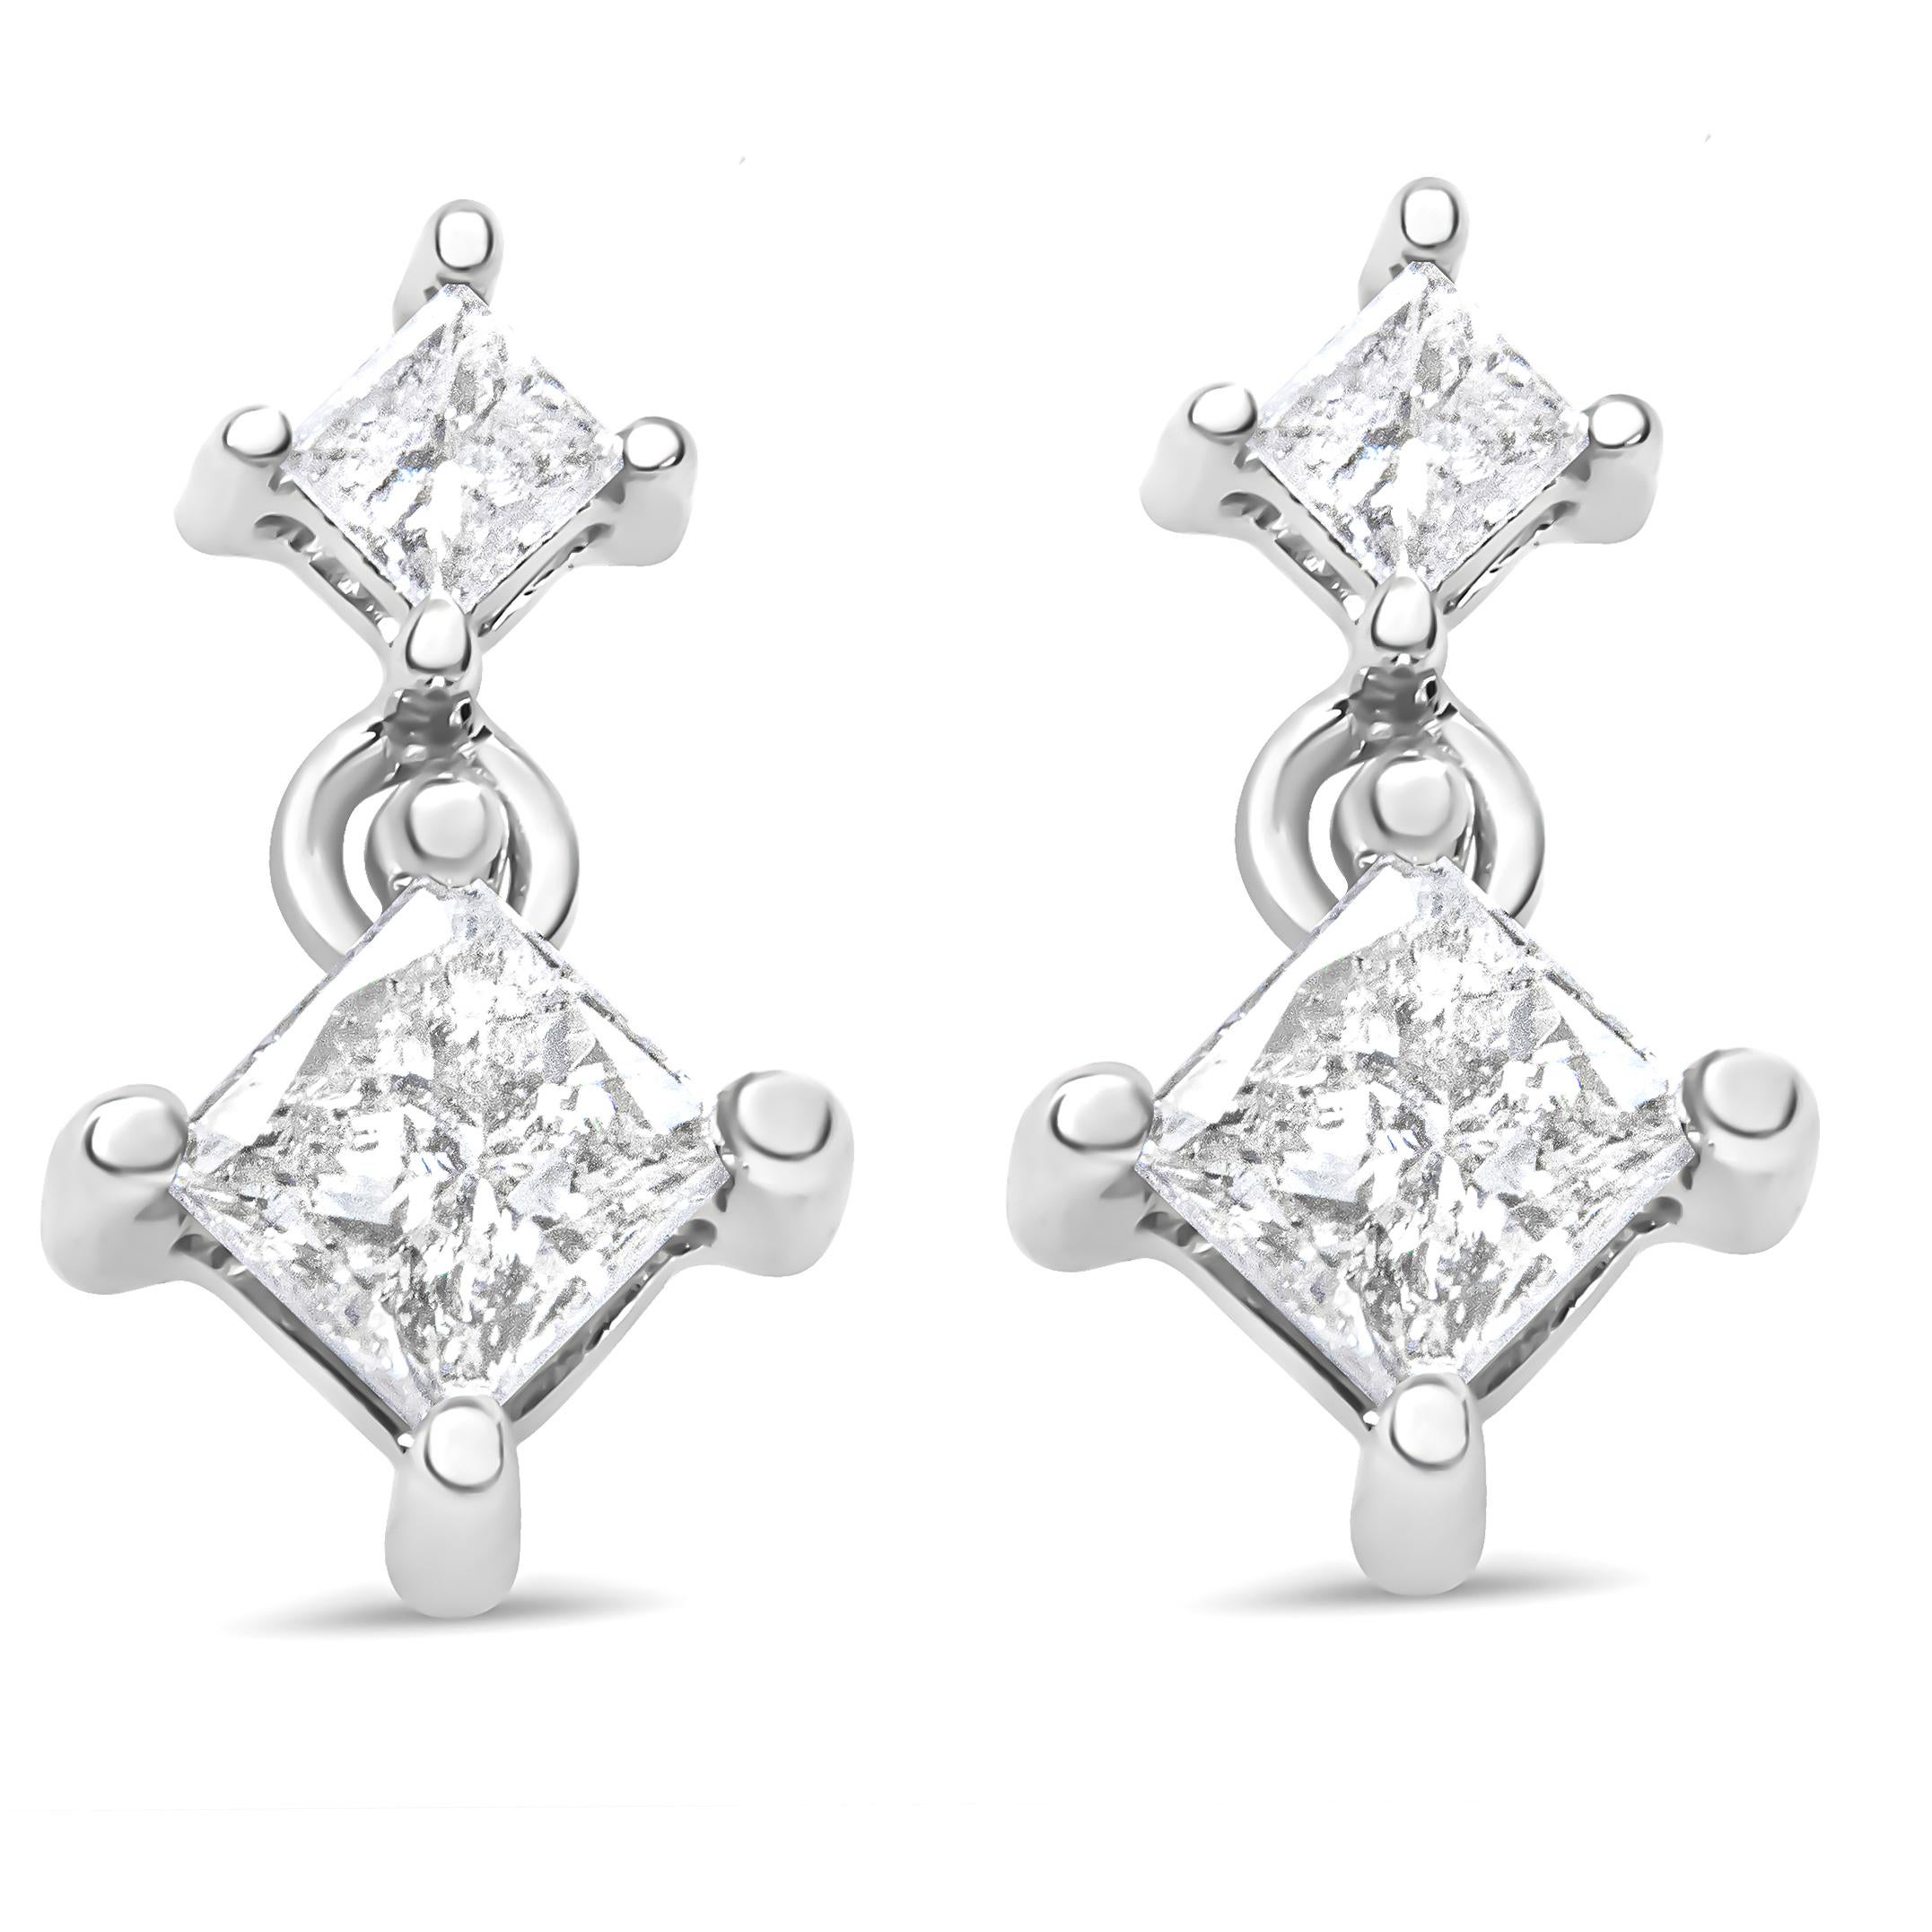 Zhuzh up your everyday jewelry by donning this stud-drop pair that amps up the elegant feel. Each side comprises two natural princess-cut diamonds in varying sizes that total up to 3/8 cttw, and they’re secured with a prong setting. The classic